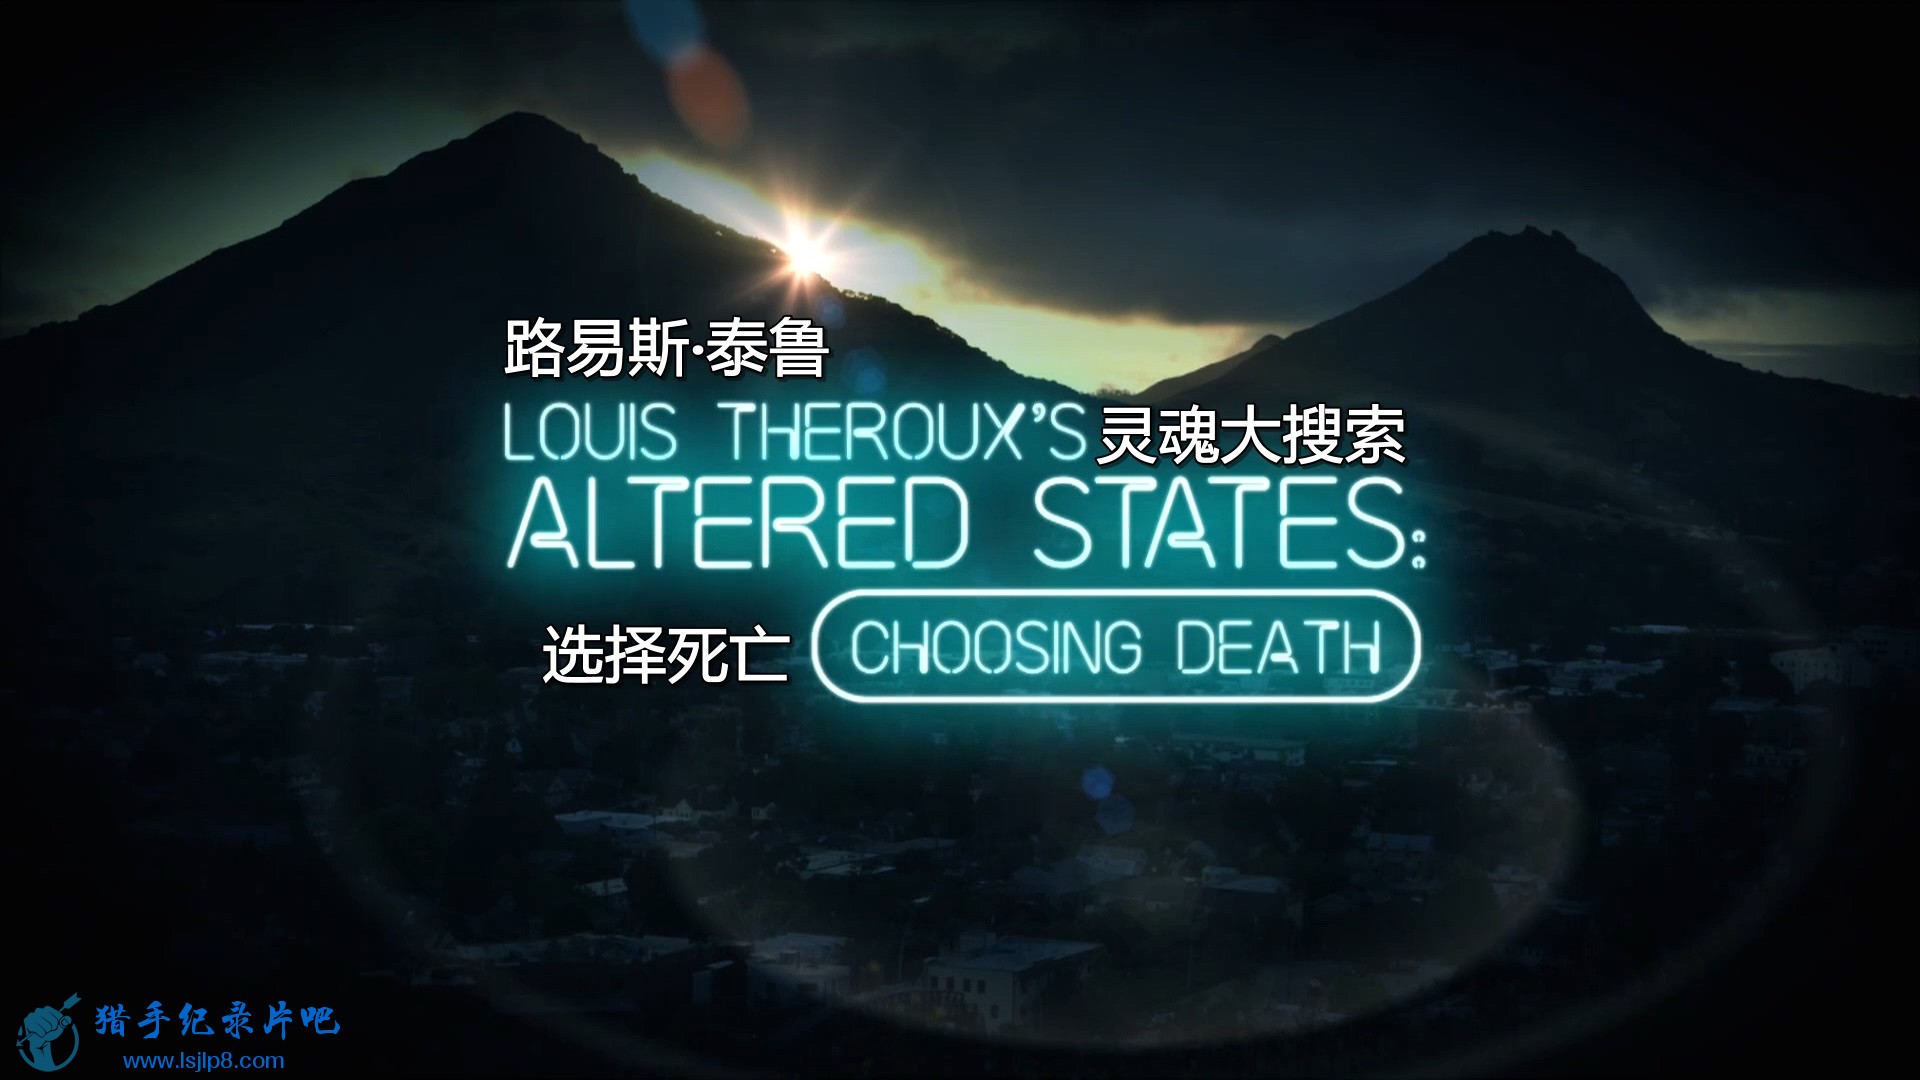 BBC.Louis.Theroux.Altered.States.Series.1.2of3.Choosing.Death.1080p.HDTV.x264.AA.jpg